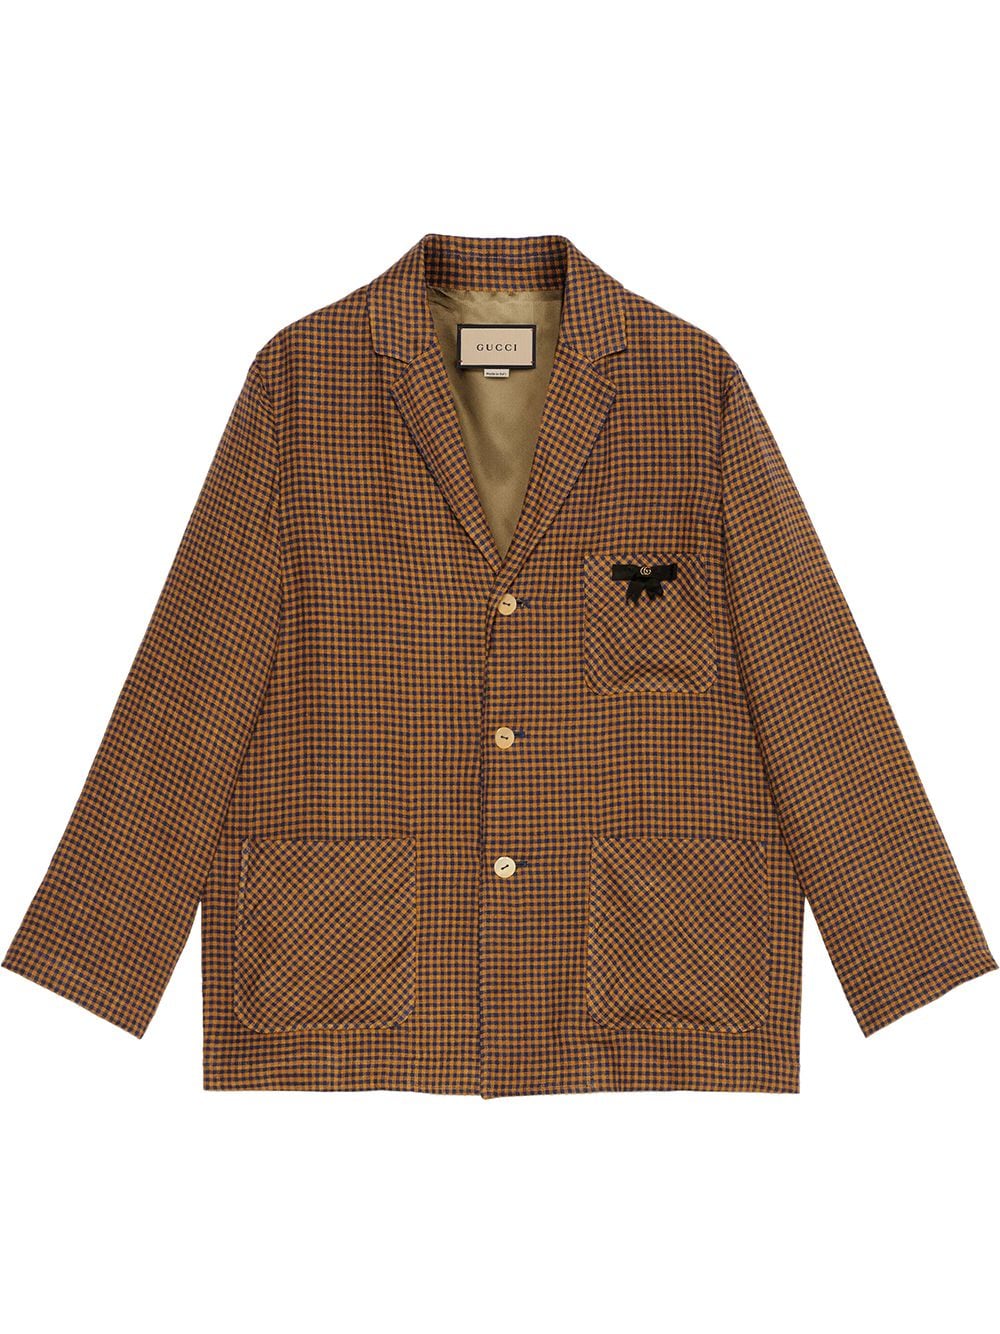 Gucci notched-lapel single-breasted jacket - Brown von Gucci